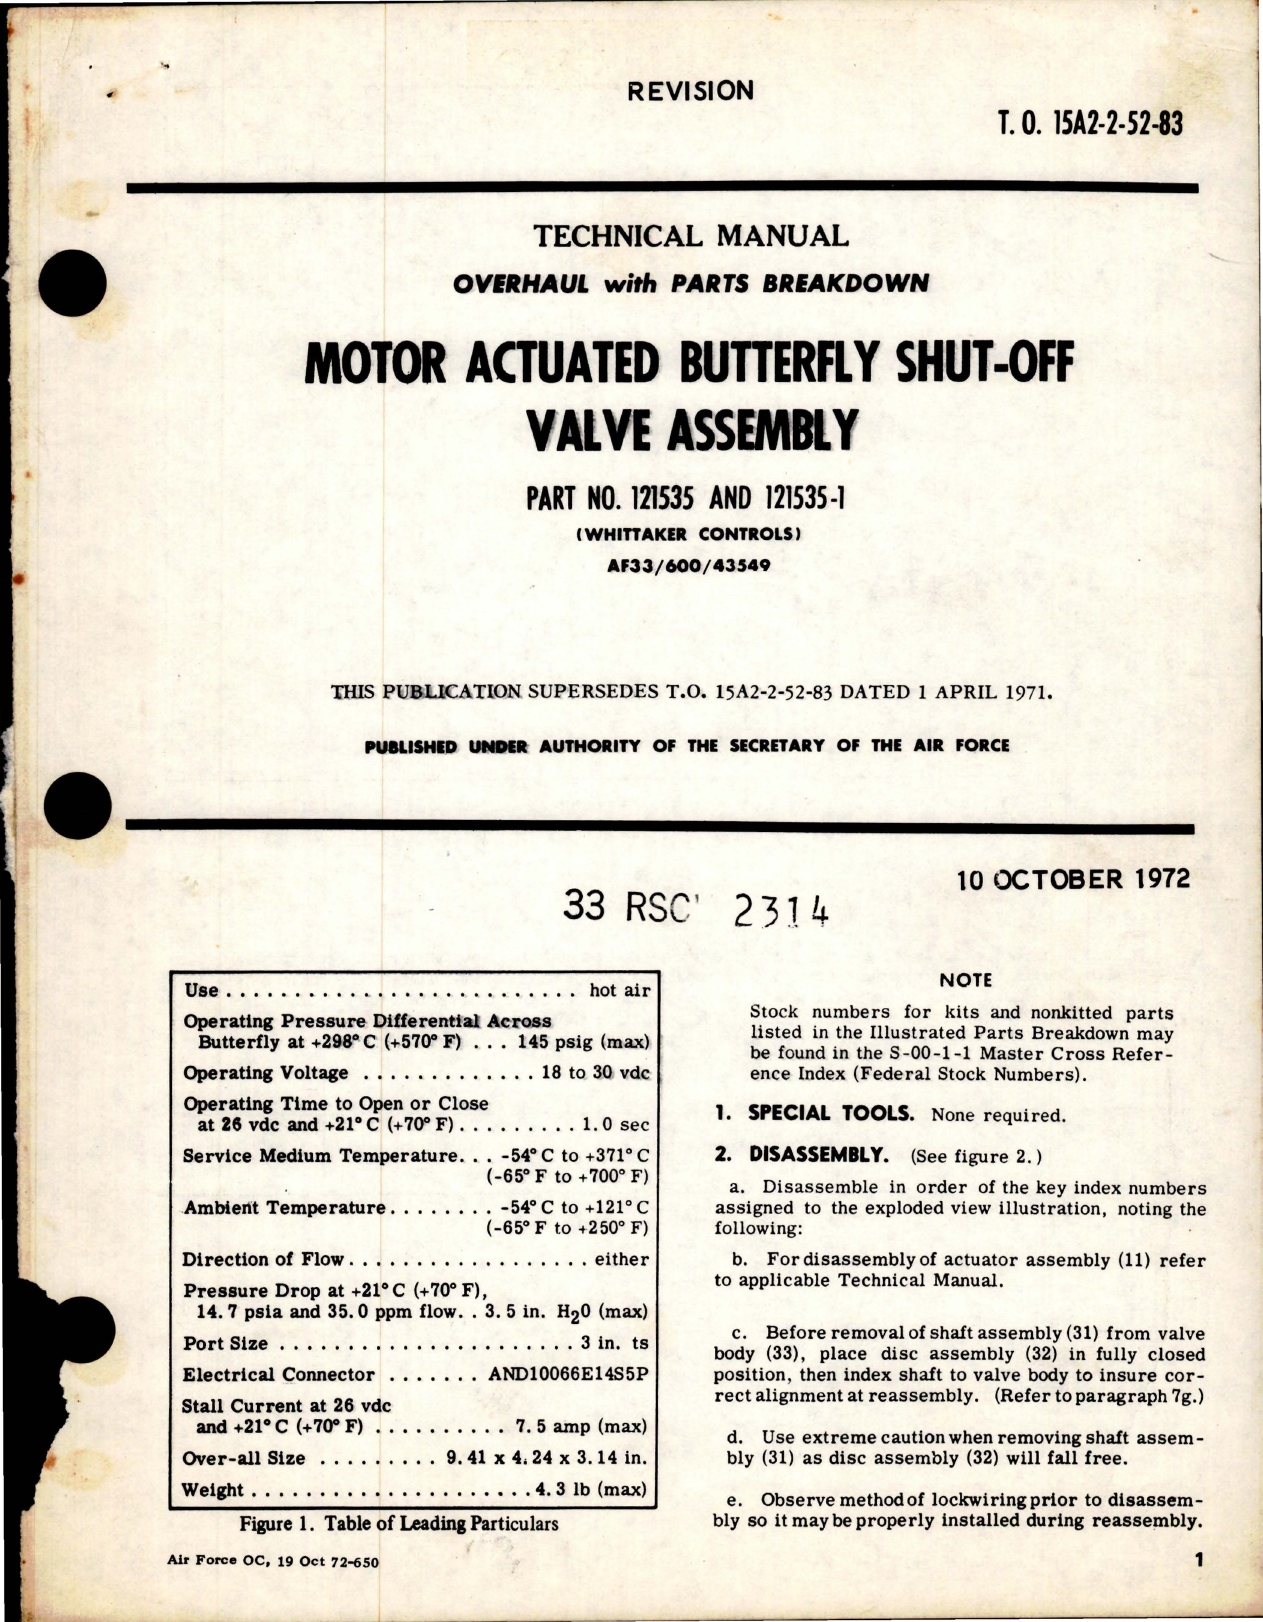 Sample page 1 from AirCorps Library document: Overhaul with Parts Breakdown for Motor Actuated Butterfly Shut-Off Valve Assembly - Parts 121535 and 121535-1 